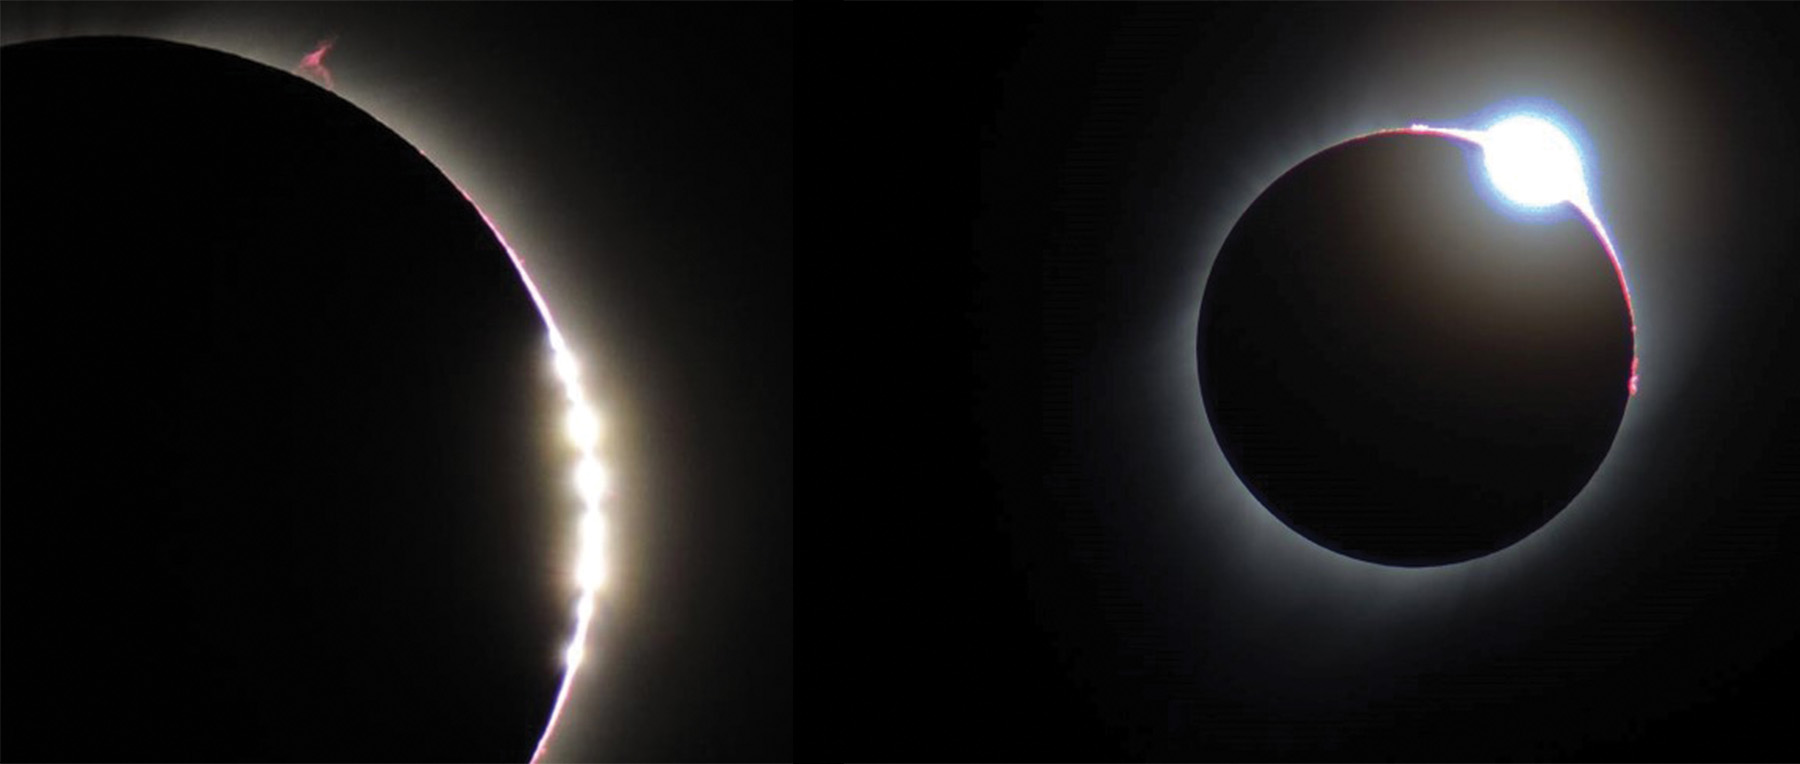 Bits of sunlight at the end of the black disk of the Moon, which is hiding the Sun during a total eclipse.